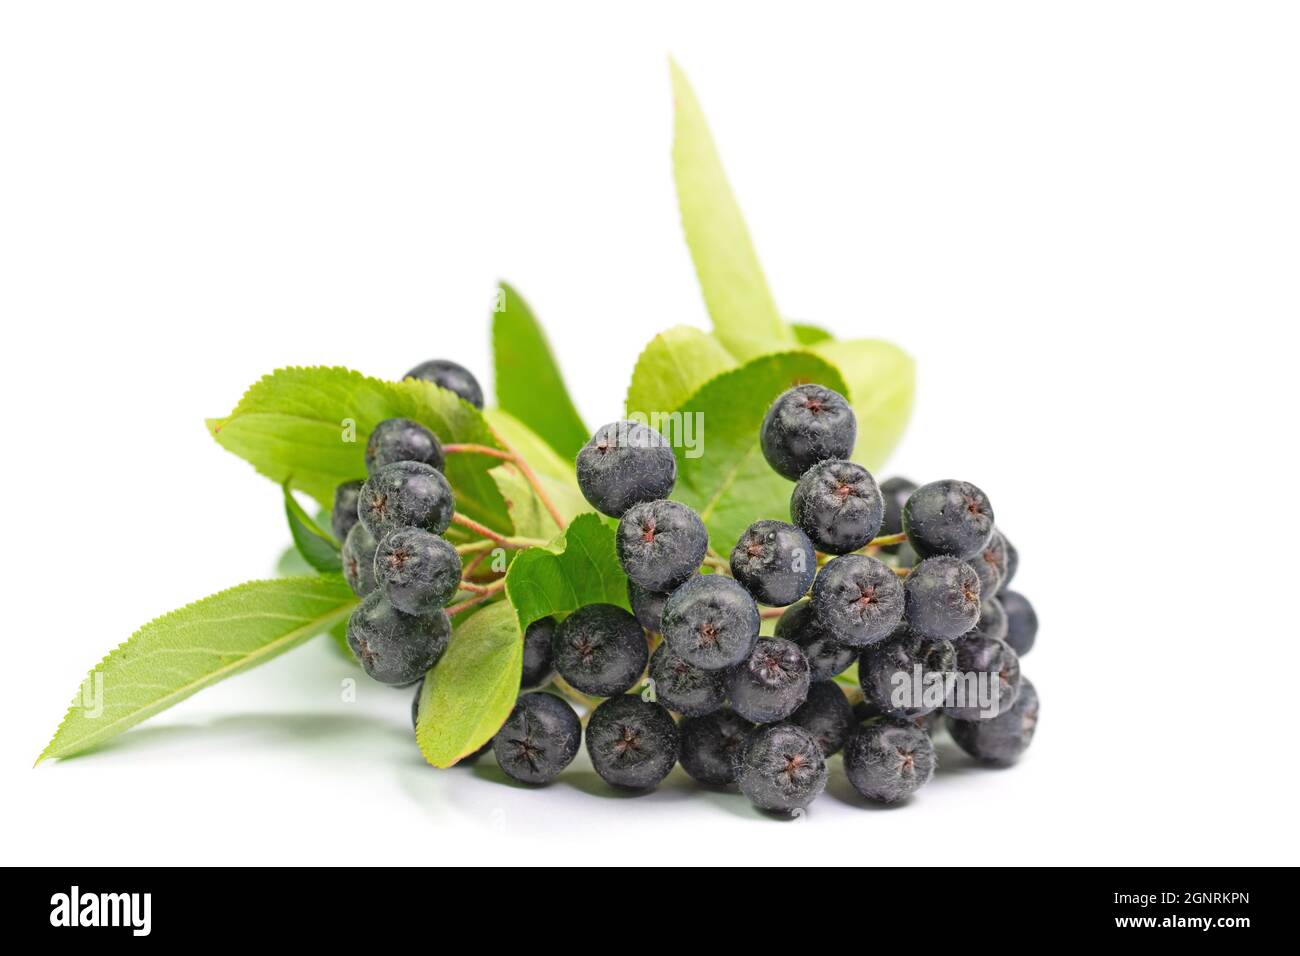 Aronia berries isolated against a white background Stock Photo